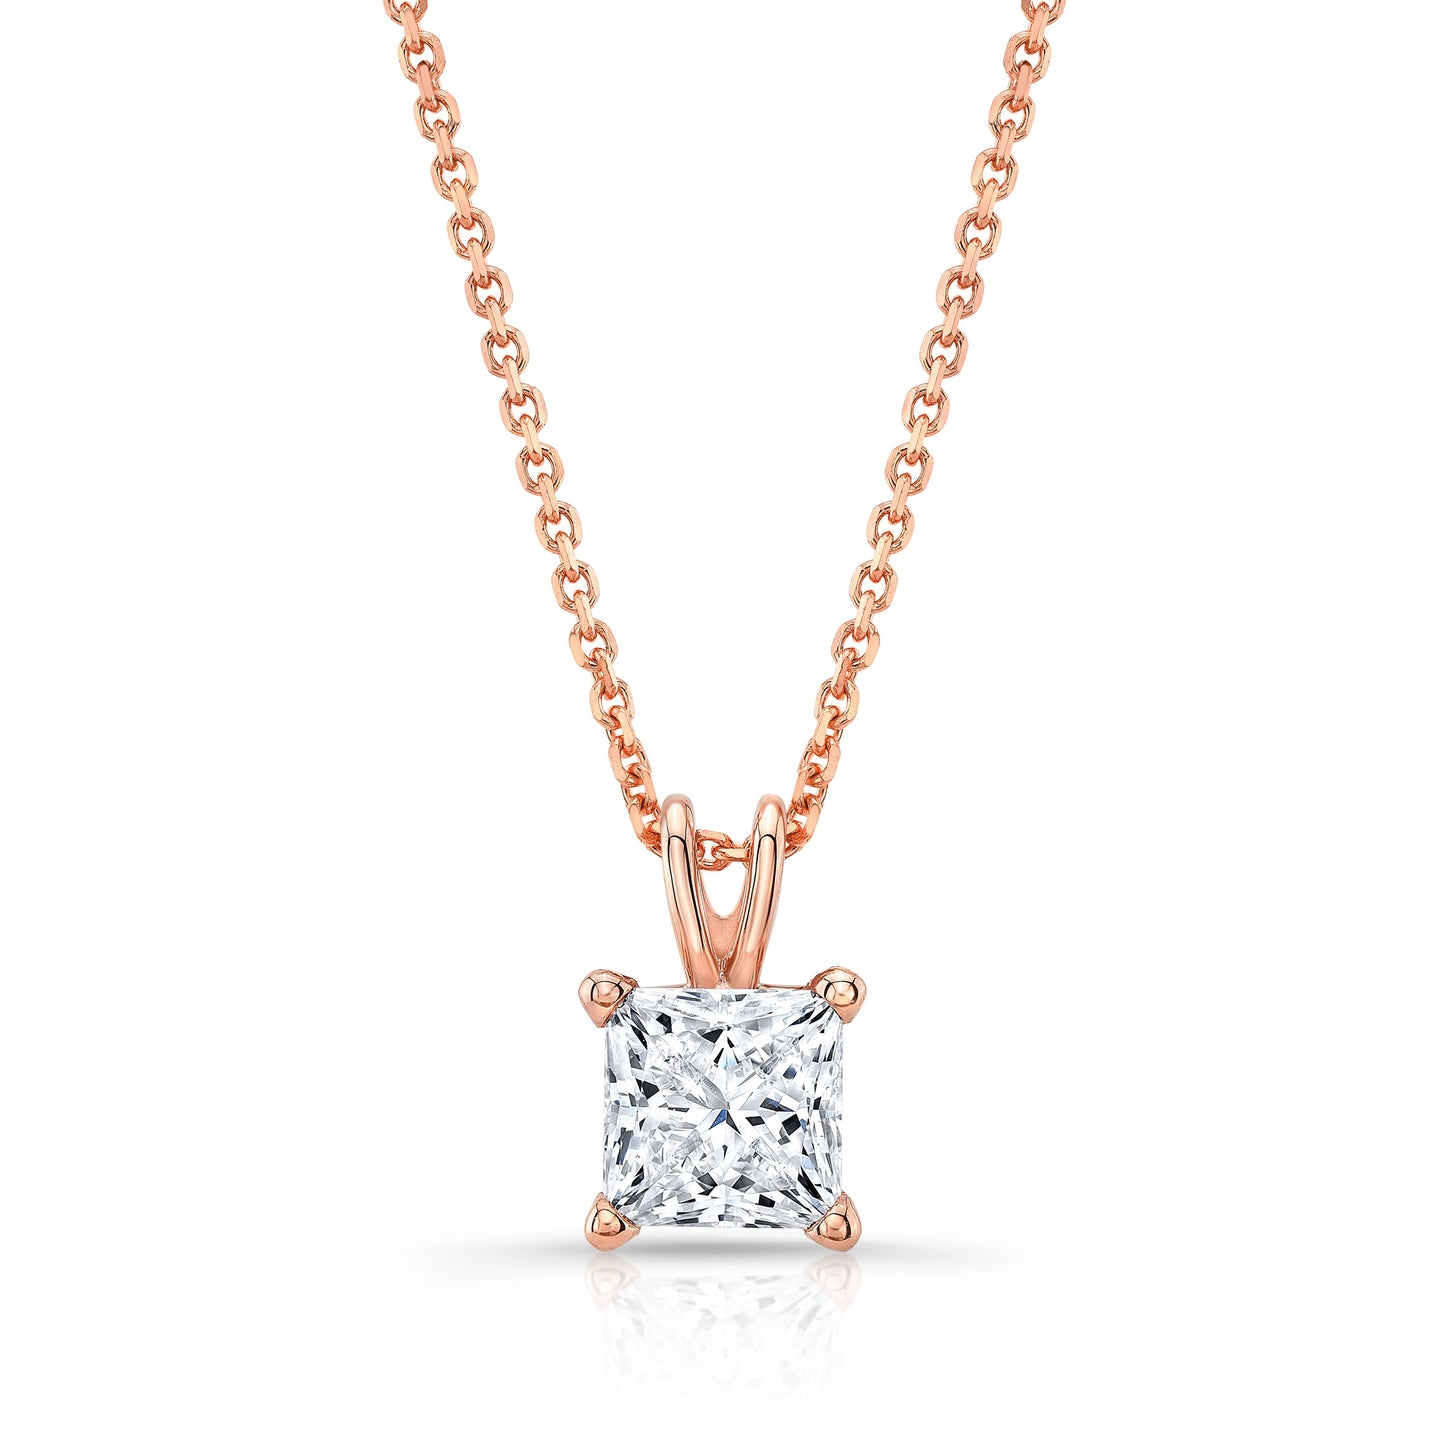 Princess Diamond Solitaire Pendant In A 14k Rose Gold 4-prong Basket Setting, 3.67ct. T.w. (hi, Si1-si2)